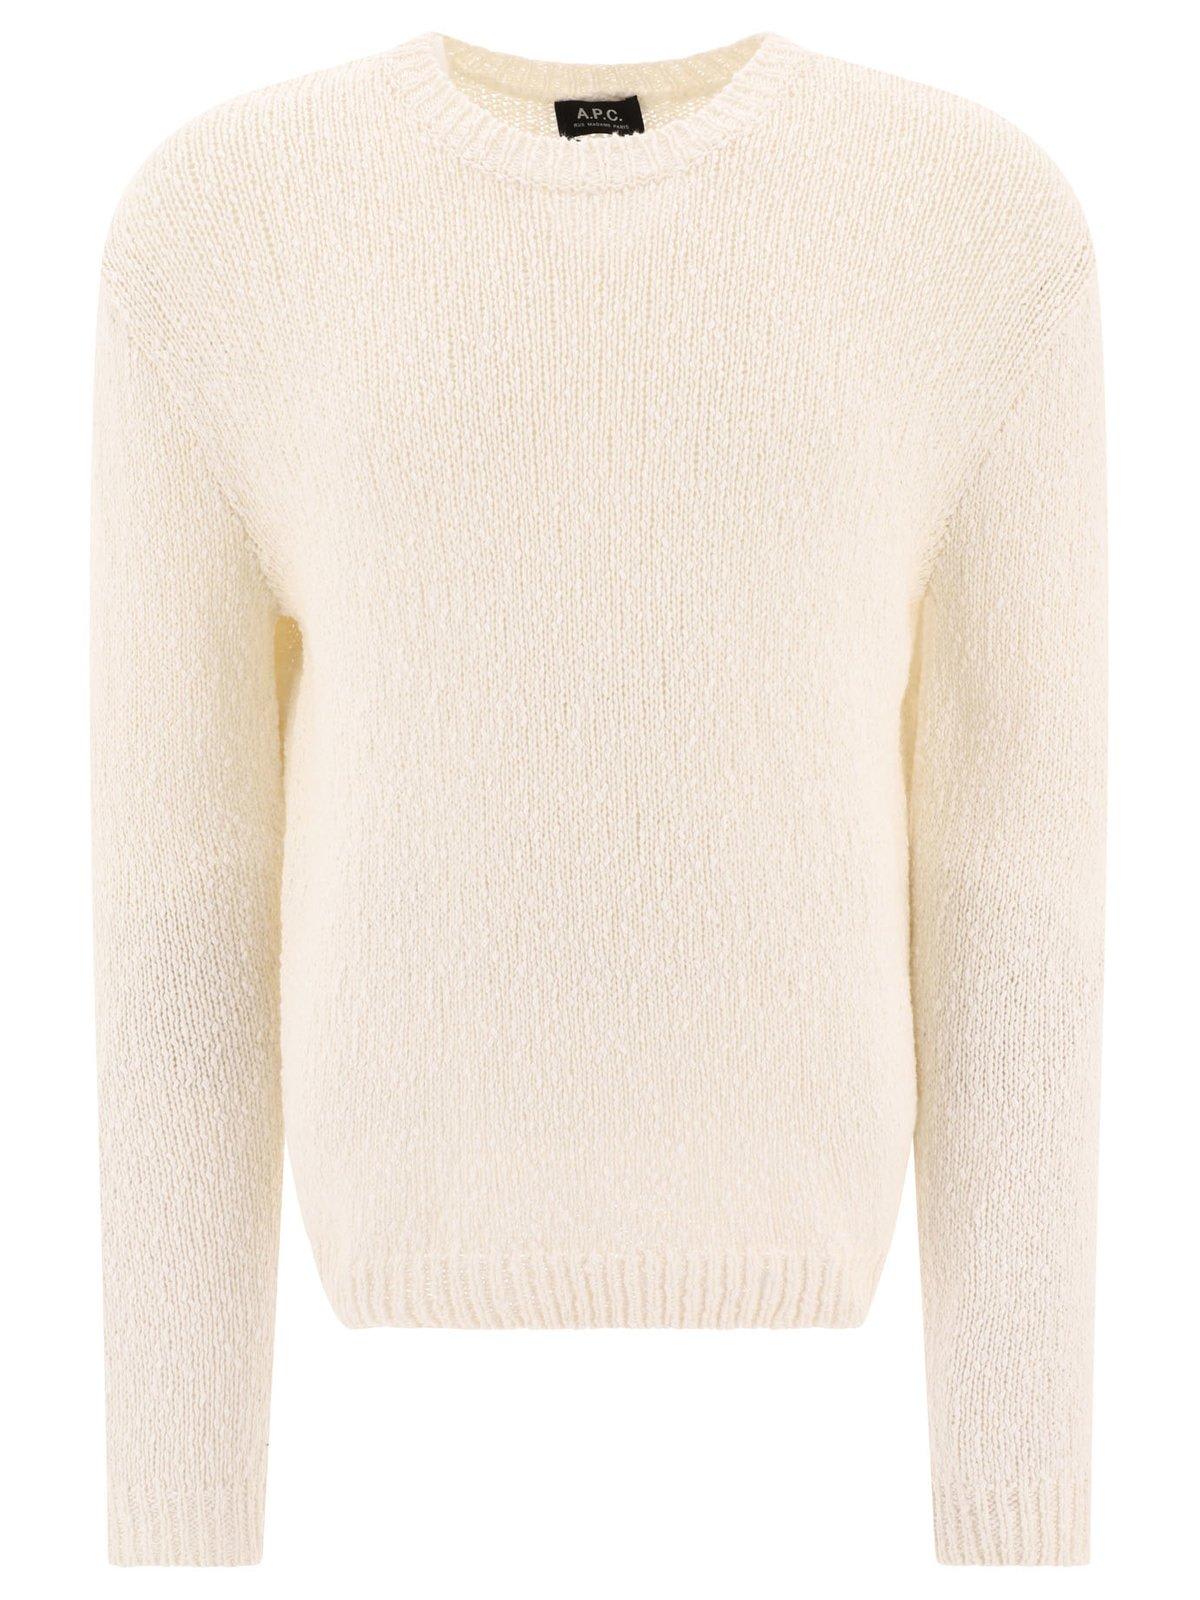 Apc Gaston Long-sleeved Crewneck Sweater In Aac Off White